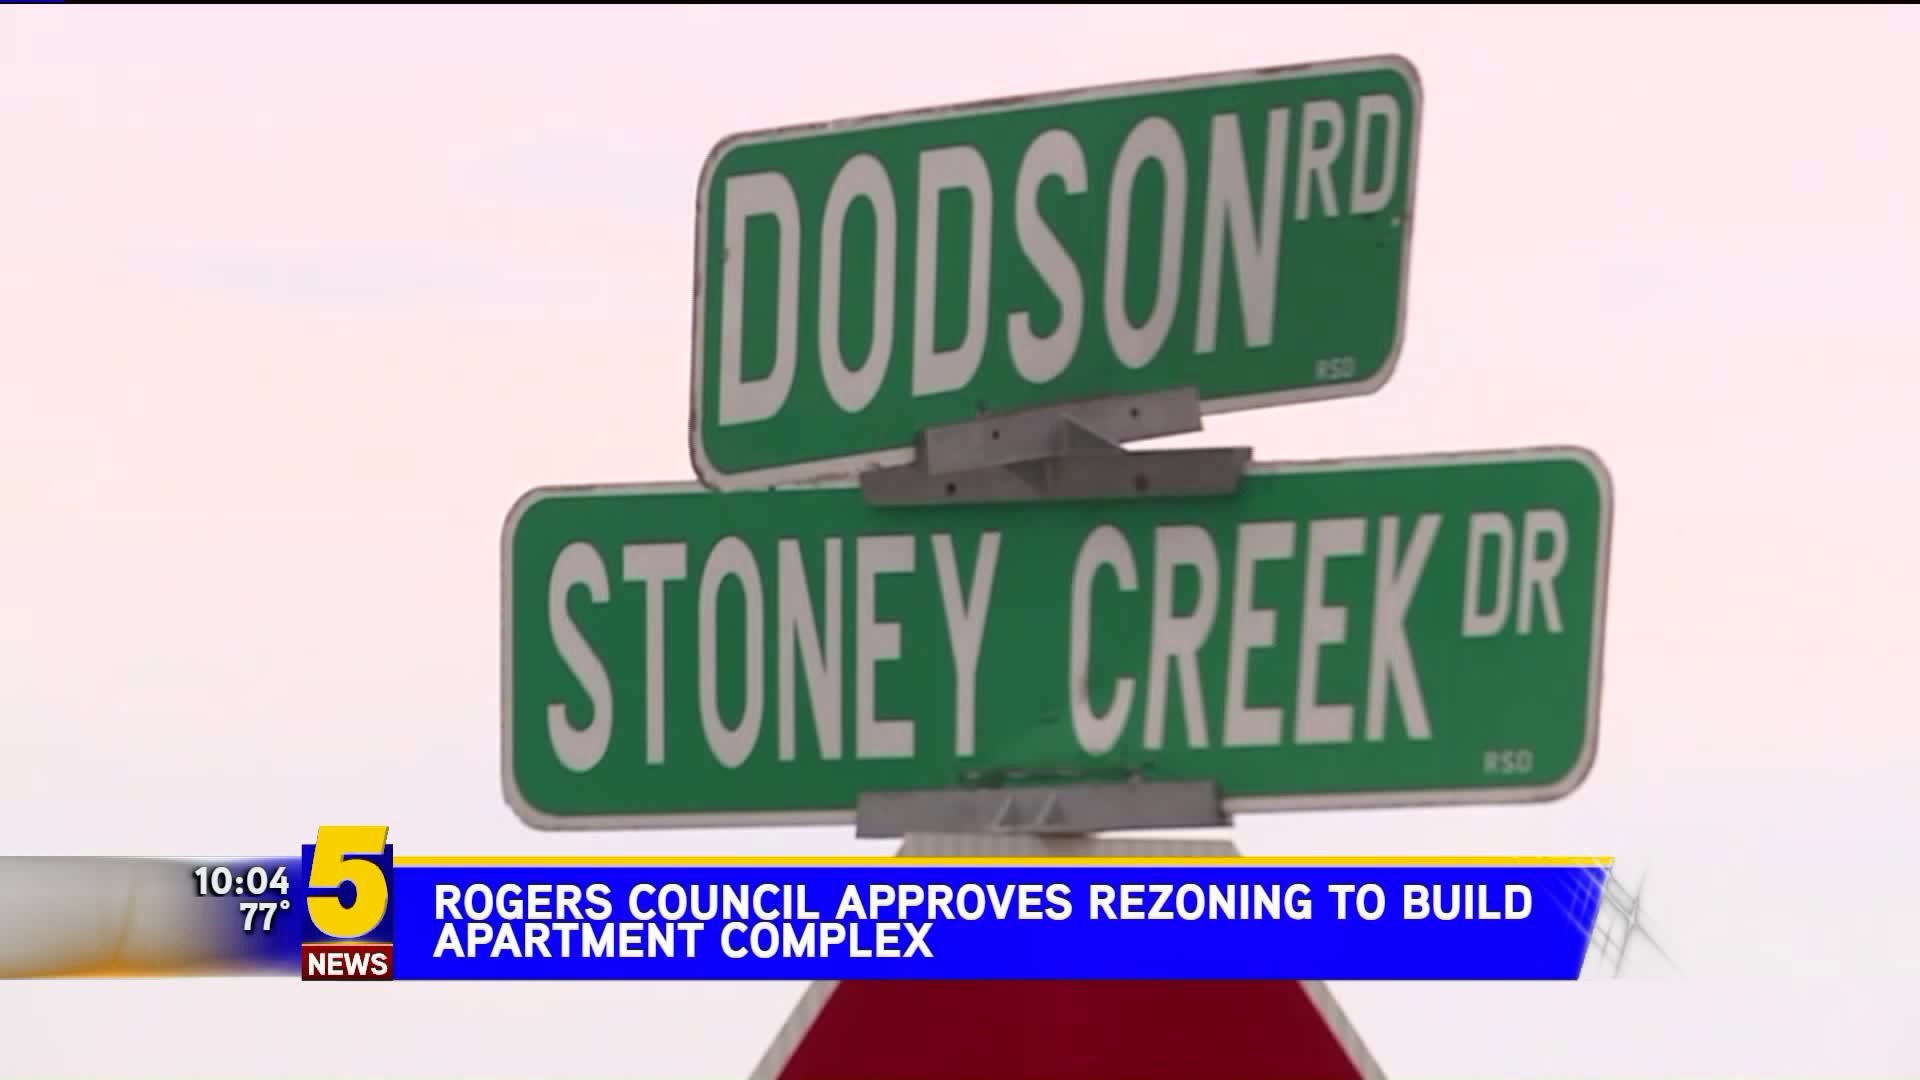 Rogers Council Approves Rezoning To Build Apartment Complex